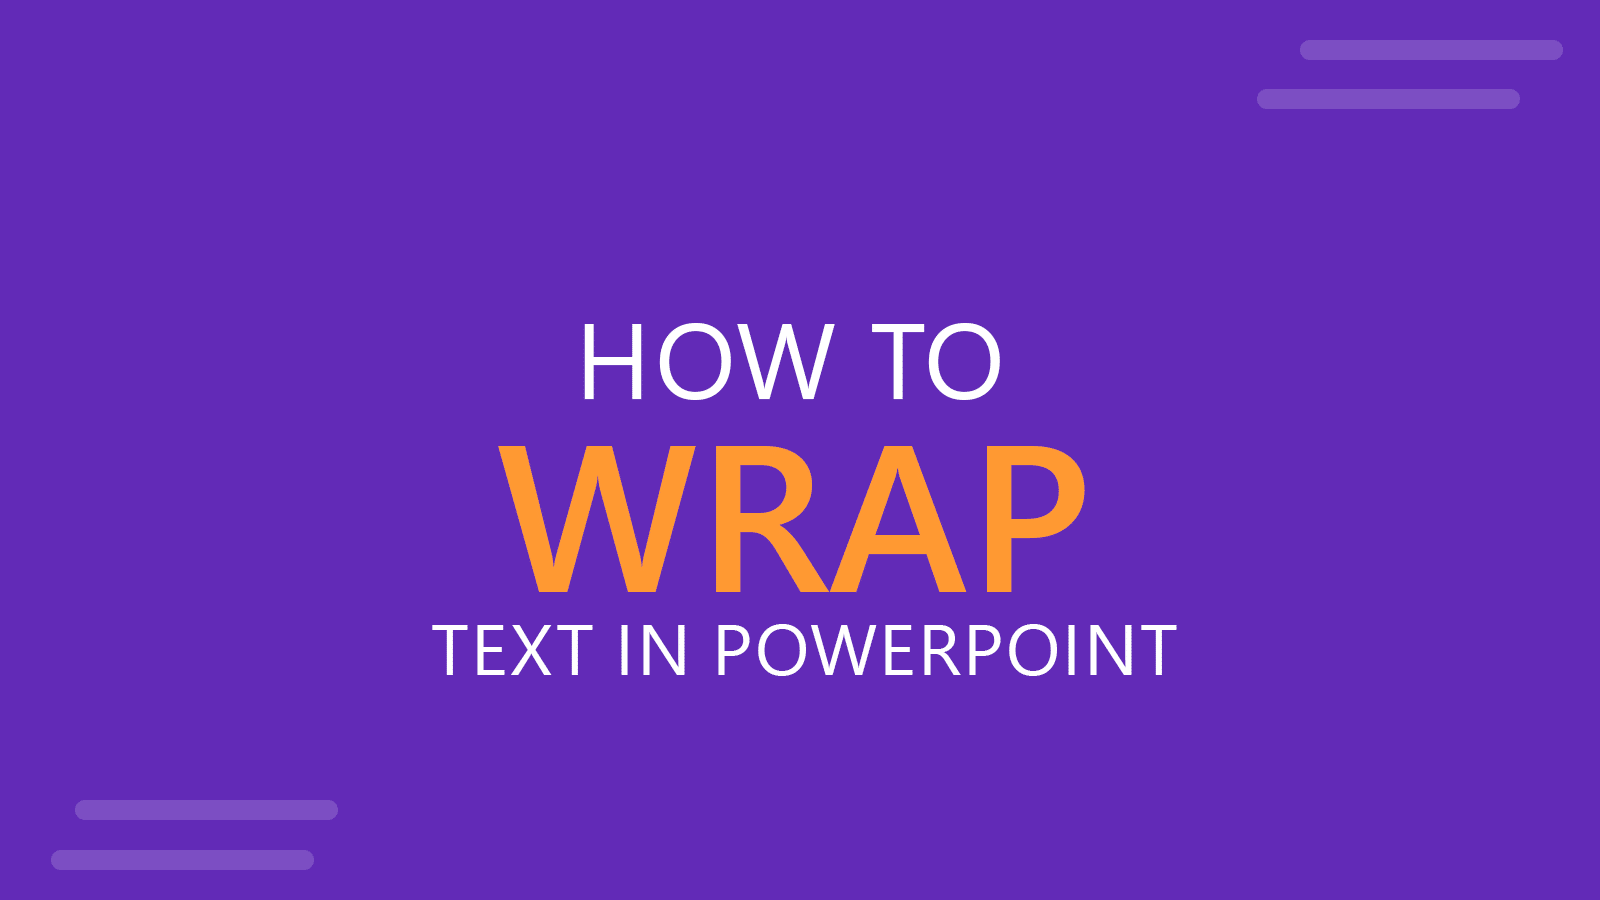 How to Wrap Text around an Image in PowerPoint: A Quick Guide